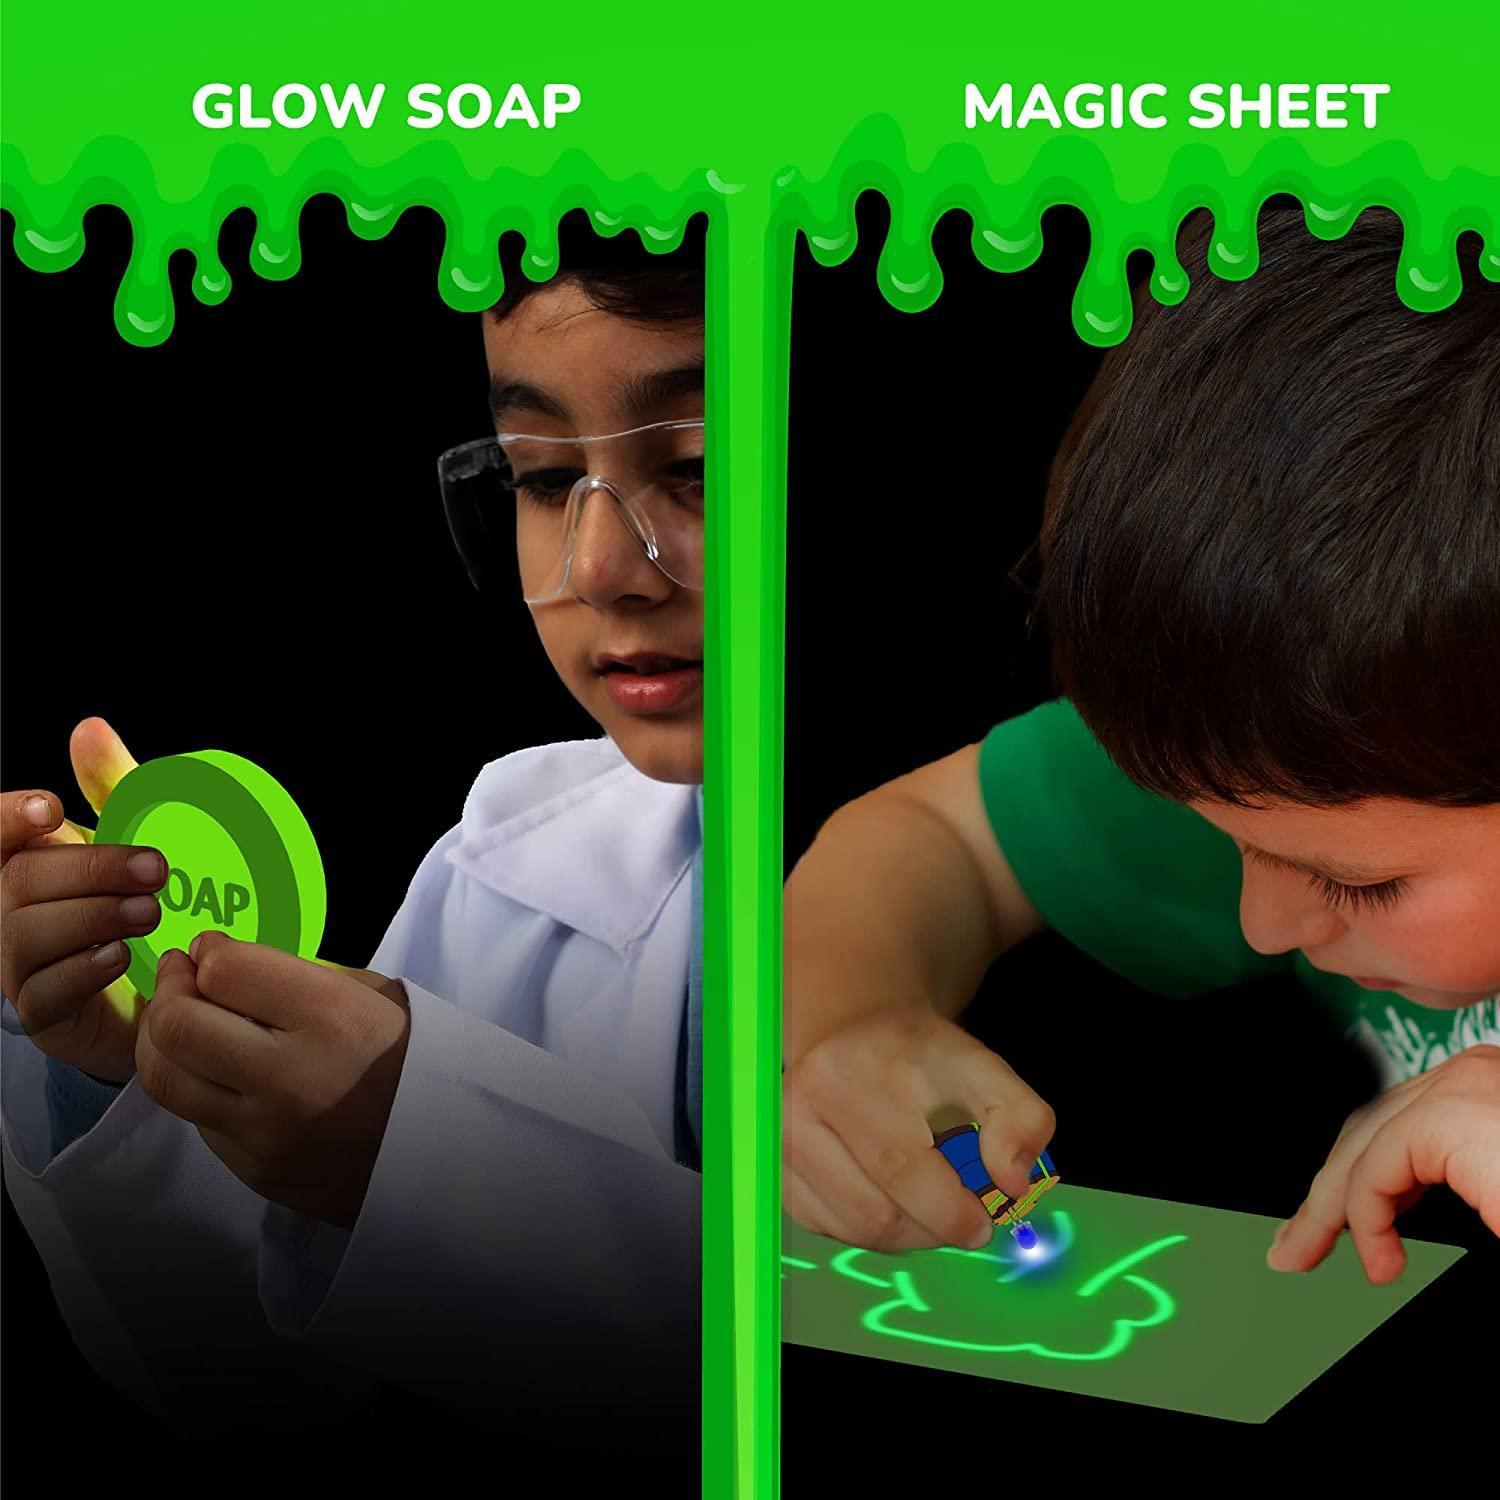 Smartivity Glow Magic Science Experiment Kit for Kids Age 6-14 Birthday  Gifts for Boys & Girls | Kids Safe & Non - Toxic Chemistry Kit for Age